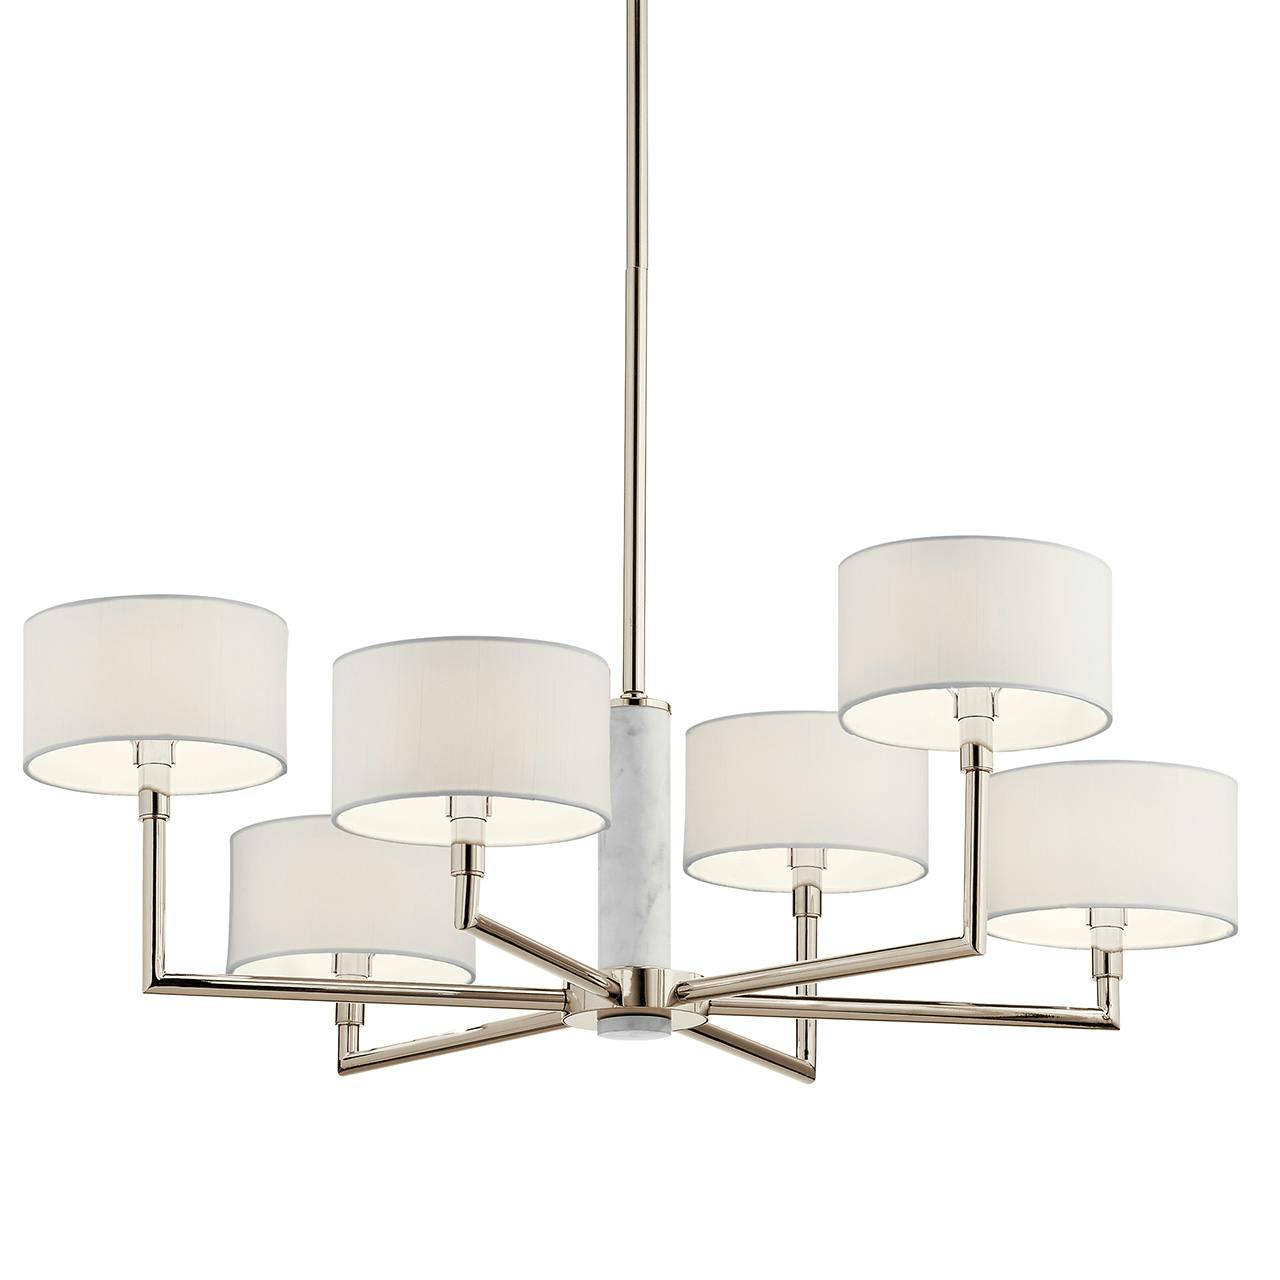 Laurent 16" 6 Light Chandelier Nickel without the canopy on a white background